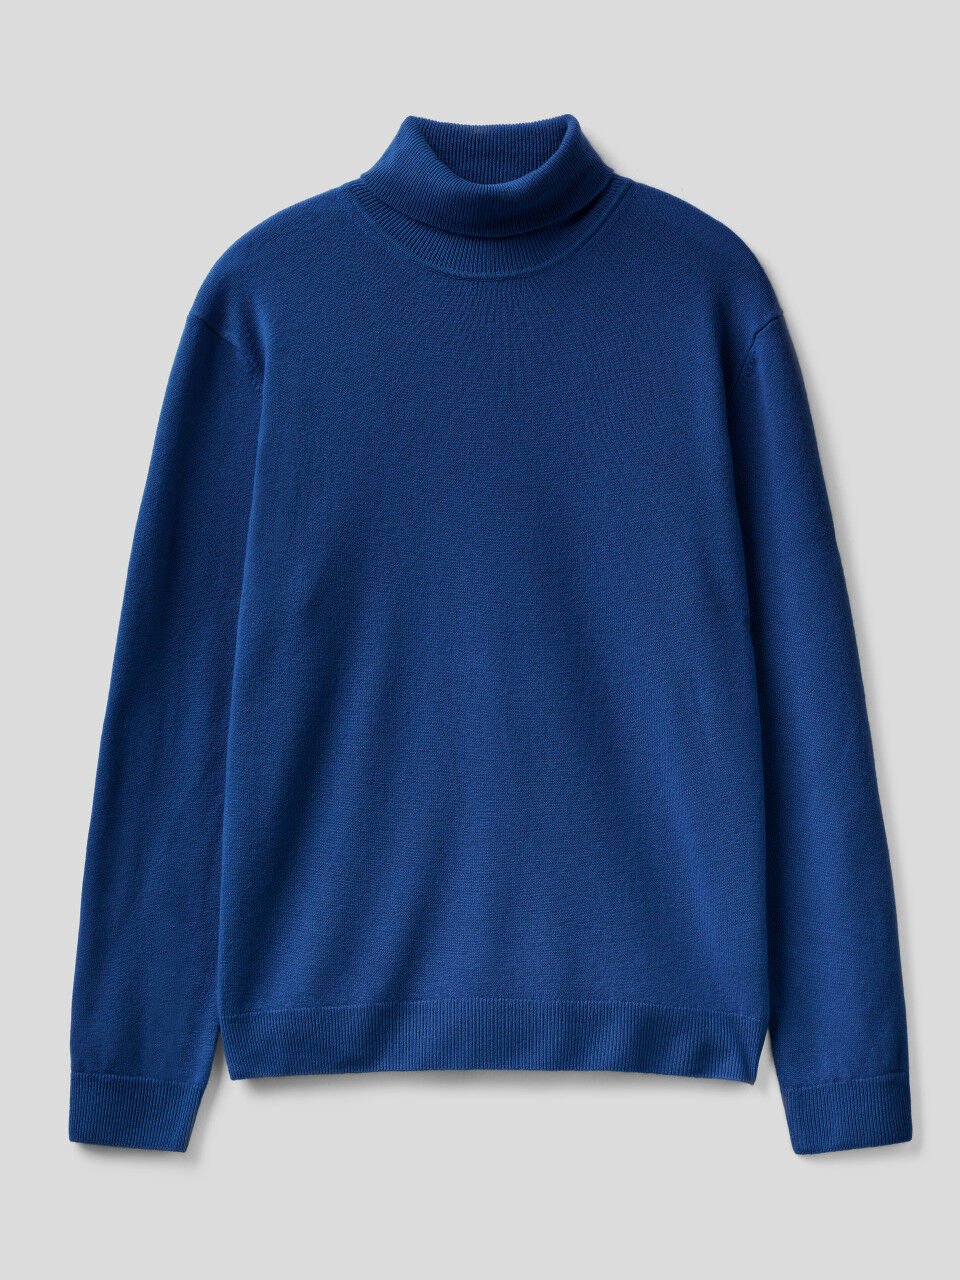 Men's High Neck Sweaters New Collection 2023 | Benetton